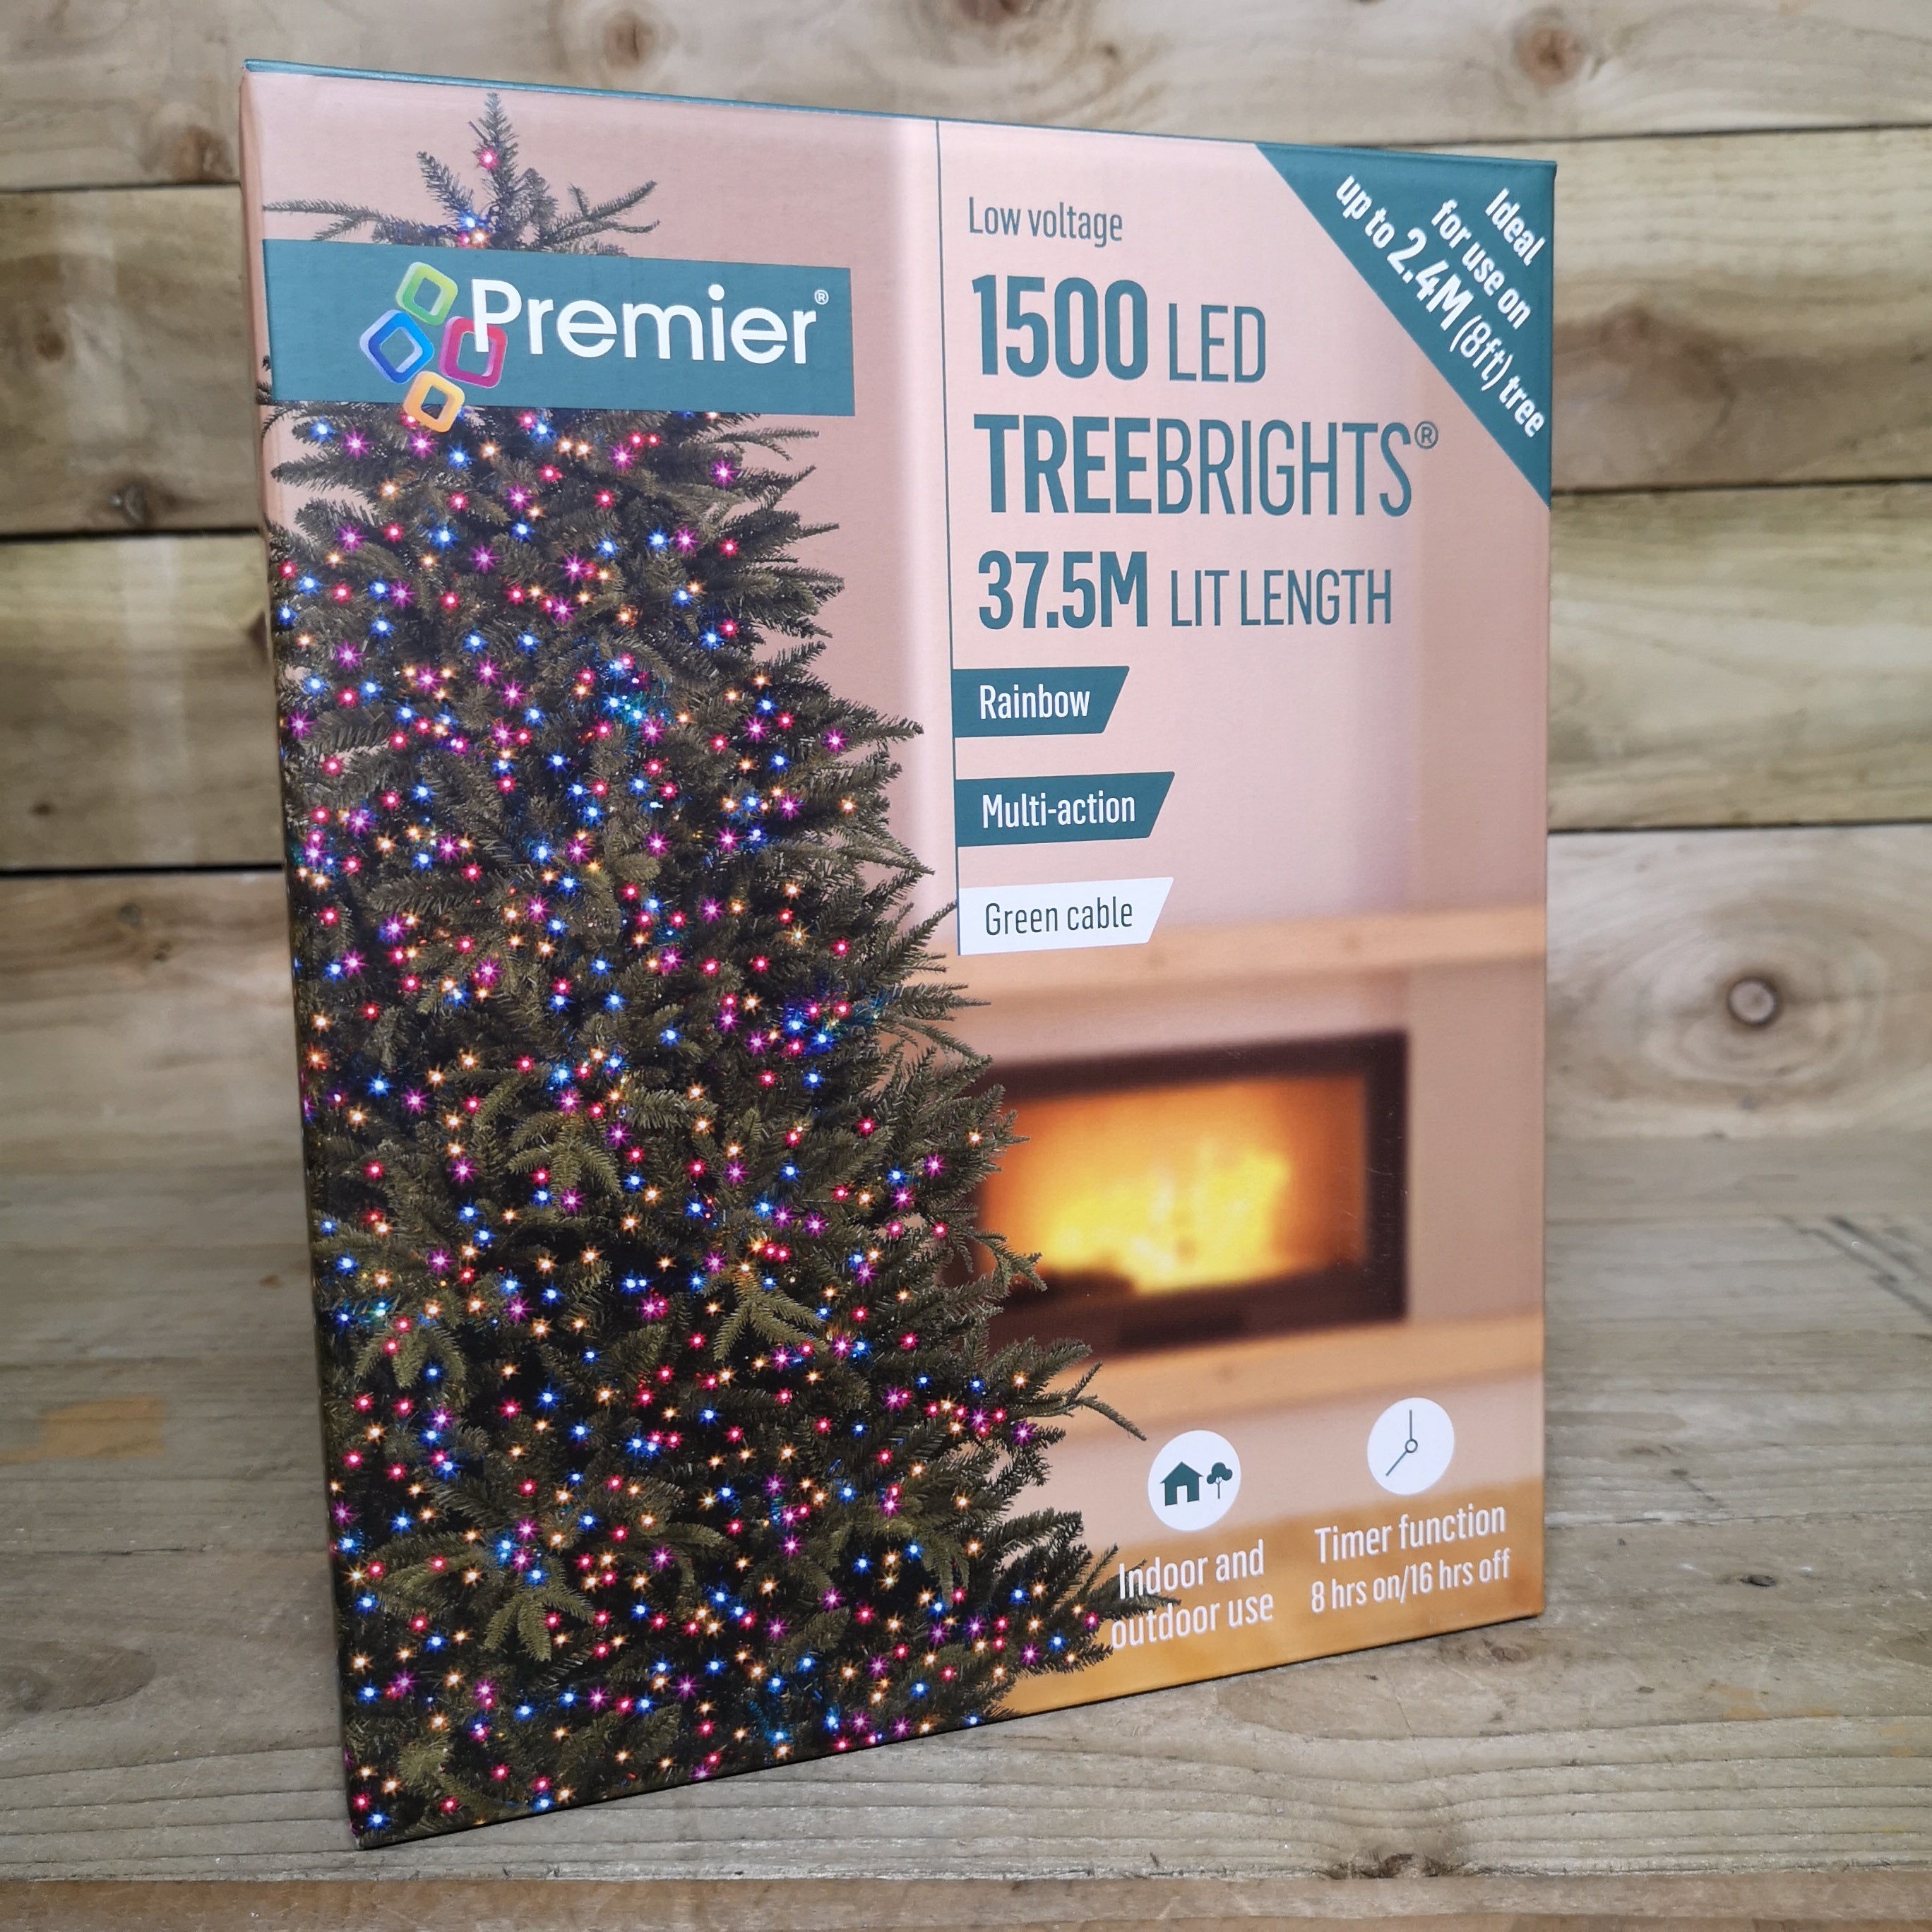 1500 LED 37.5m Premier TreeBrights Indoor Outdoor Christmas Multi Function Mains Operated String Lights with Timer in in Rainbow